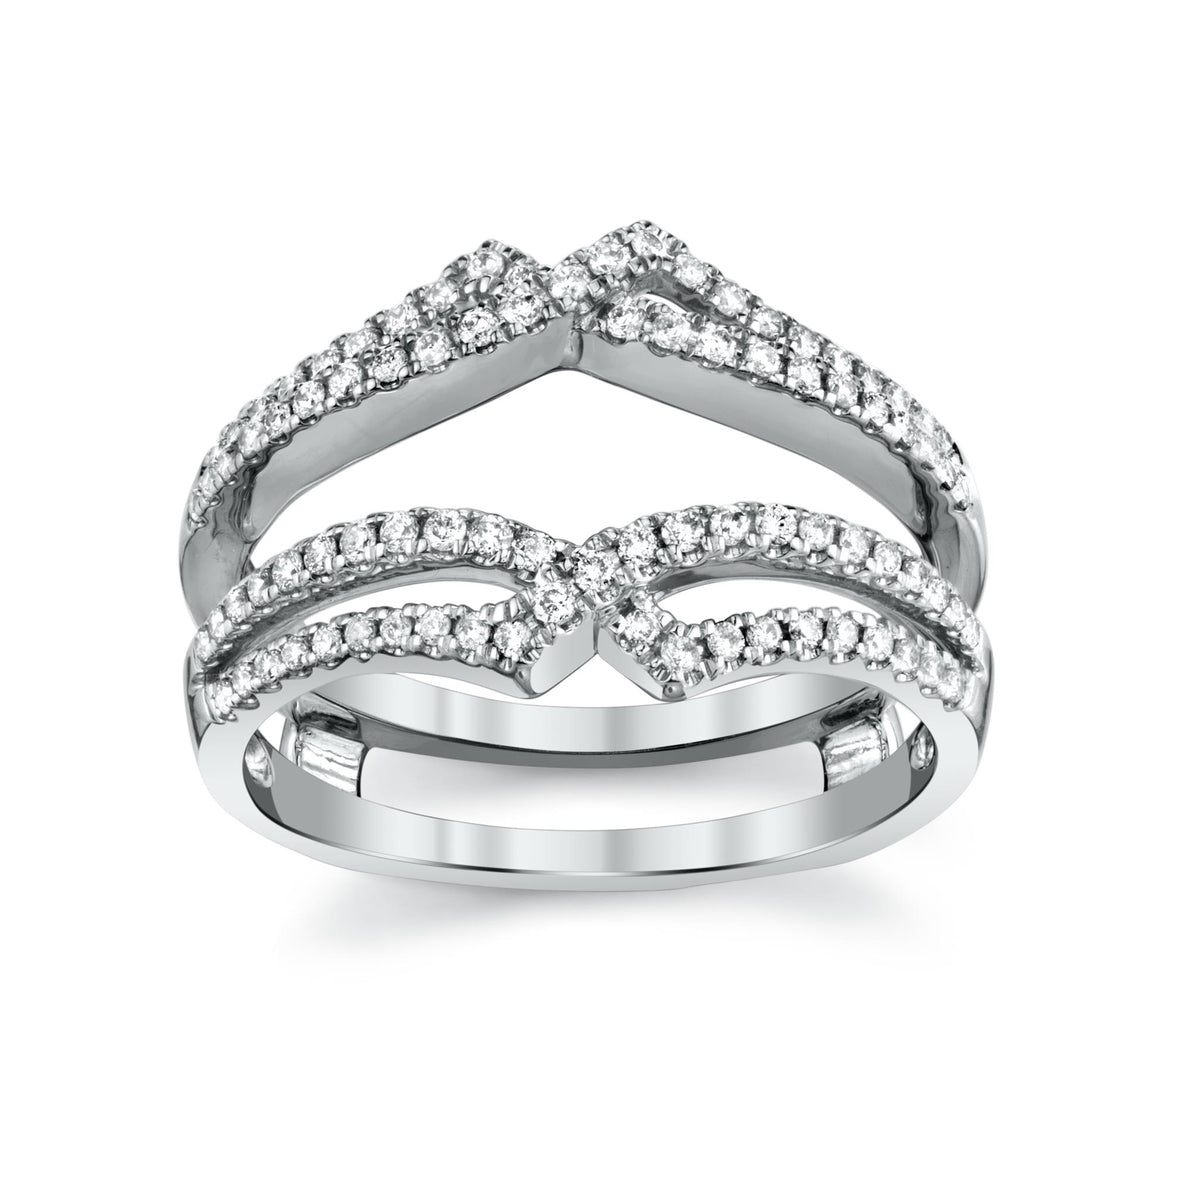 14Kt White Gold Insert Guard Ring With 0.40cttw Natural Diamonds